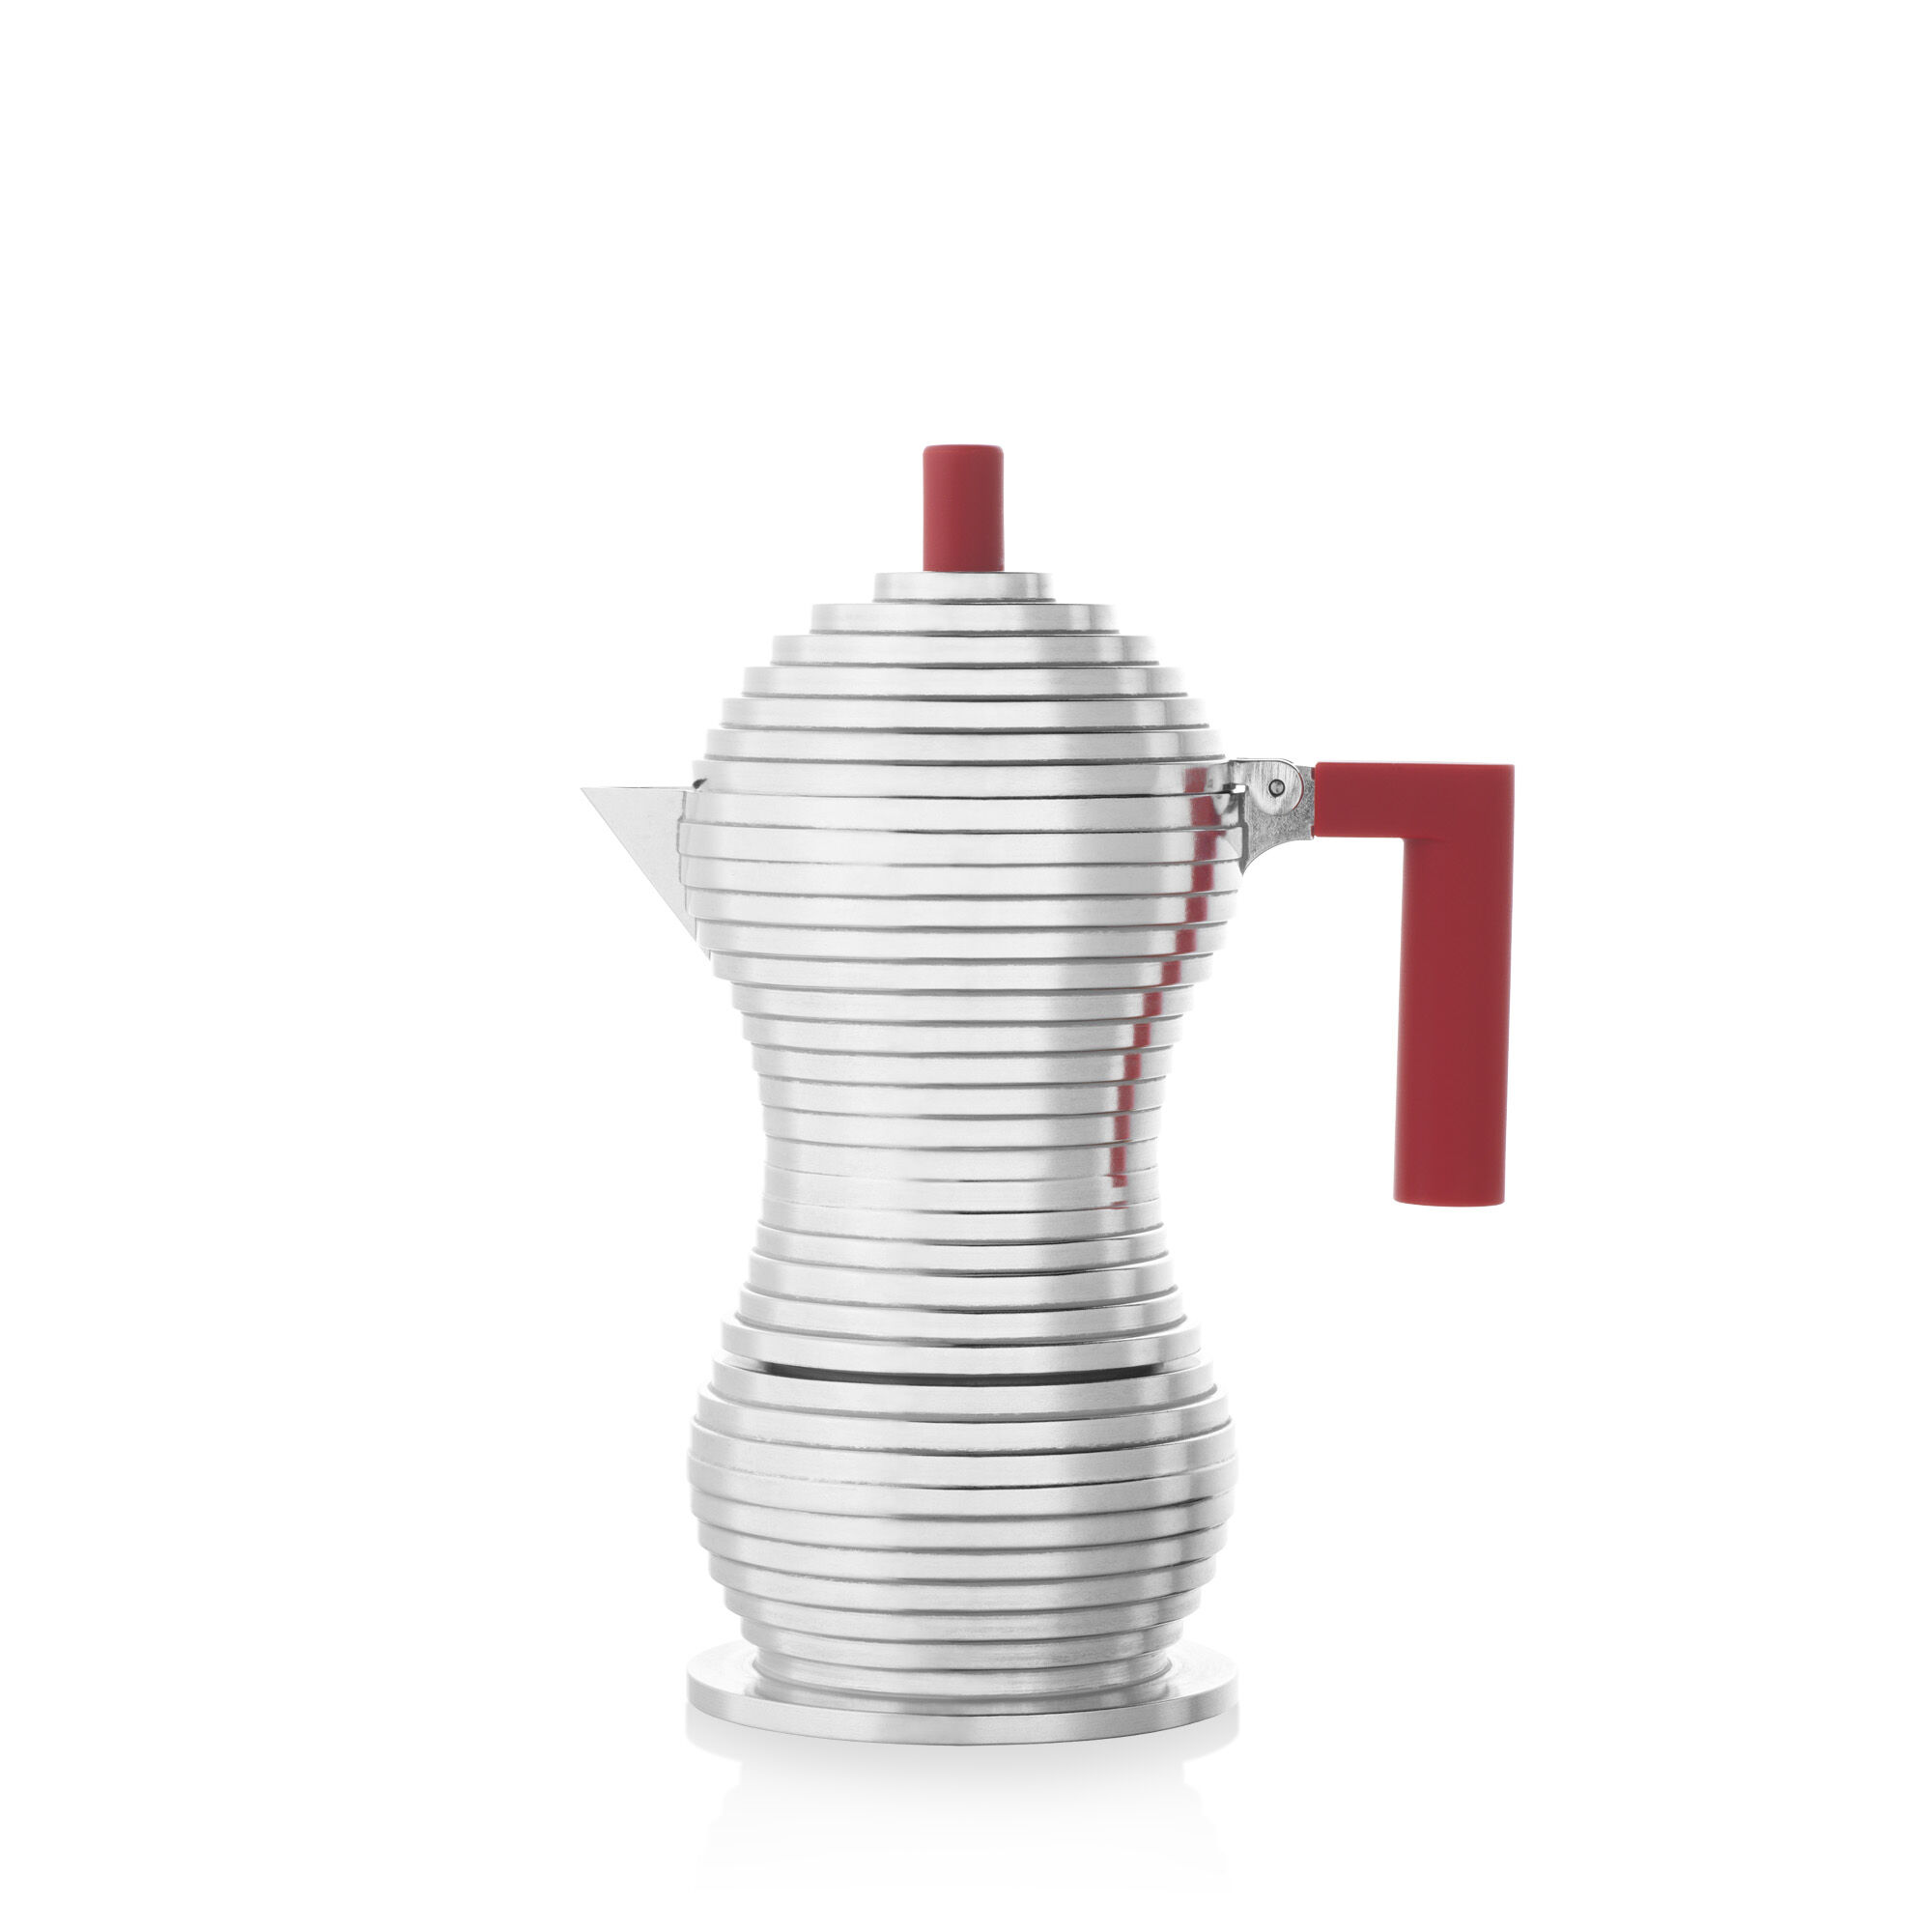 3-cup coffee pot – the Alessi Pulcina moka pot for induction hobs